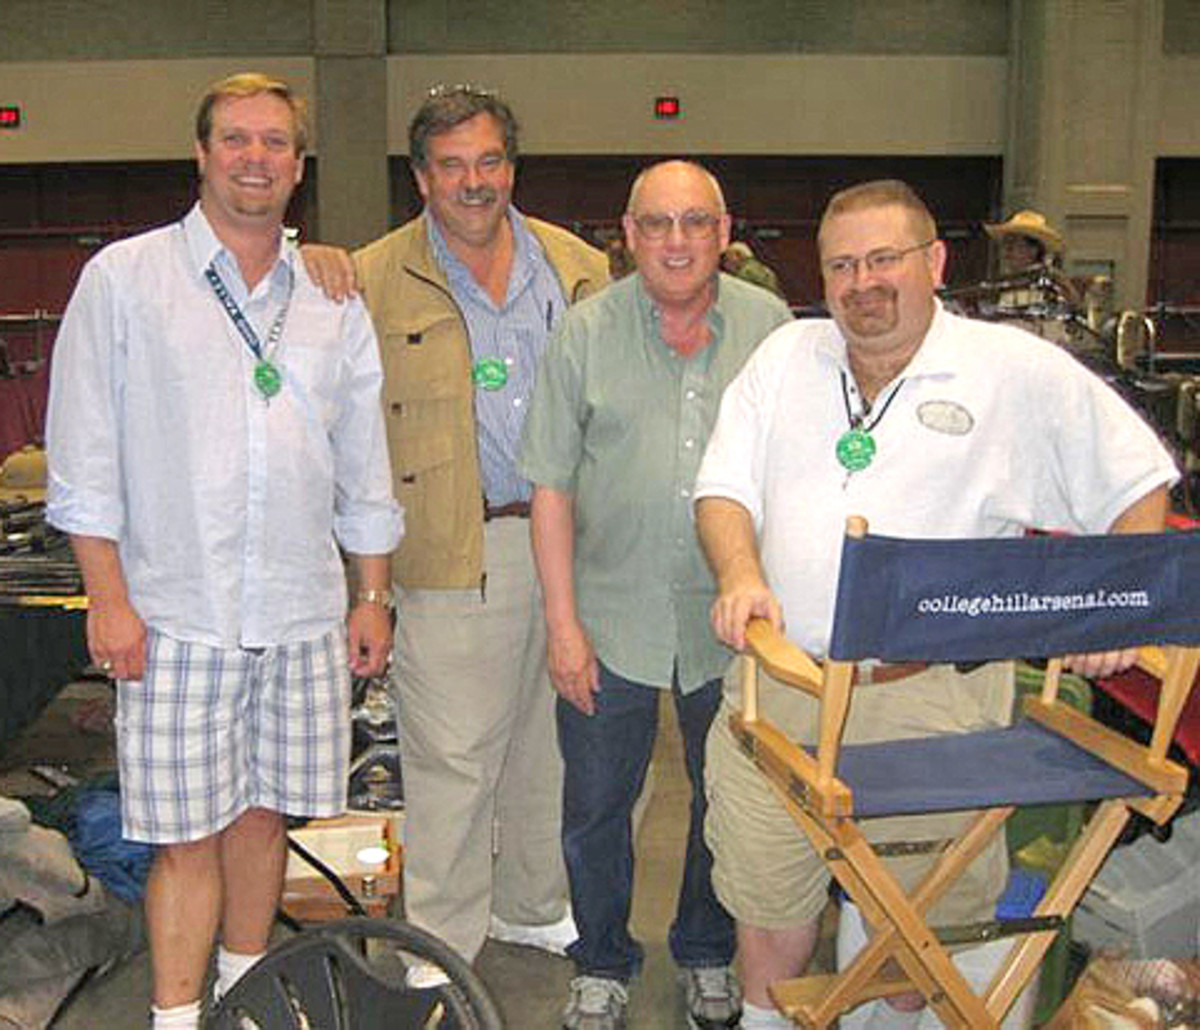 The four “Civil War musketeers.” From left to right: Rafael Eledge of Shiloh Relics in Tennessee; Dave Taylor of Civil War Antiques, Sylvania, Ohio; Glen Mattox of Antique Gun Shoppe in Post Falls,Idaho: and Tim Prince of College Hill Arsenal in Tennessee. All are full-time, dedicated antique arms dealers. Photo taken at the National Gun Day Show in Louisville, Ky.